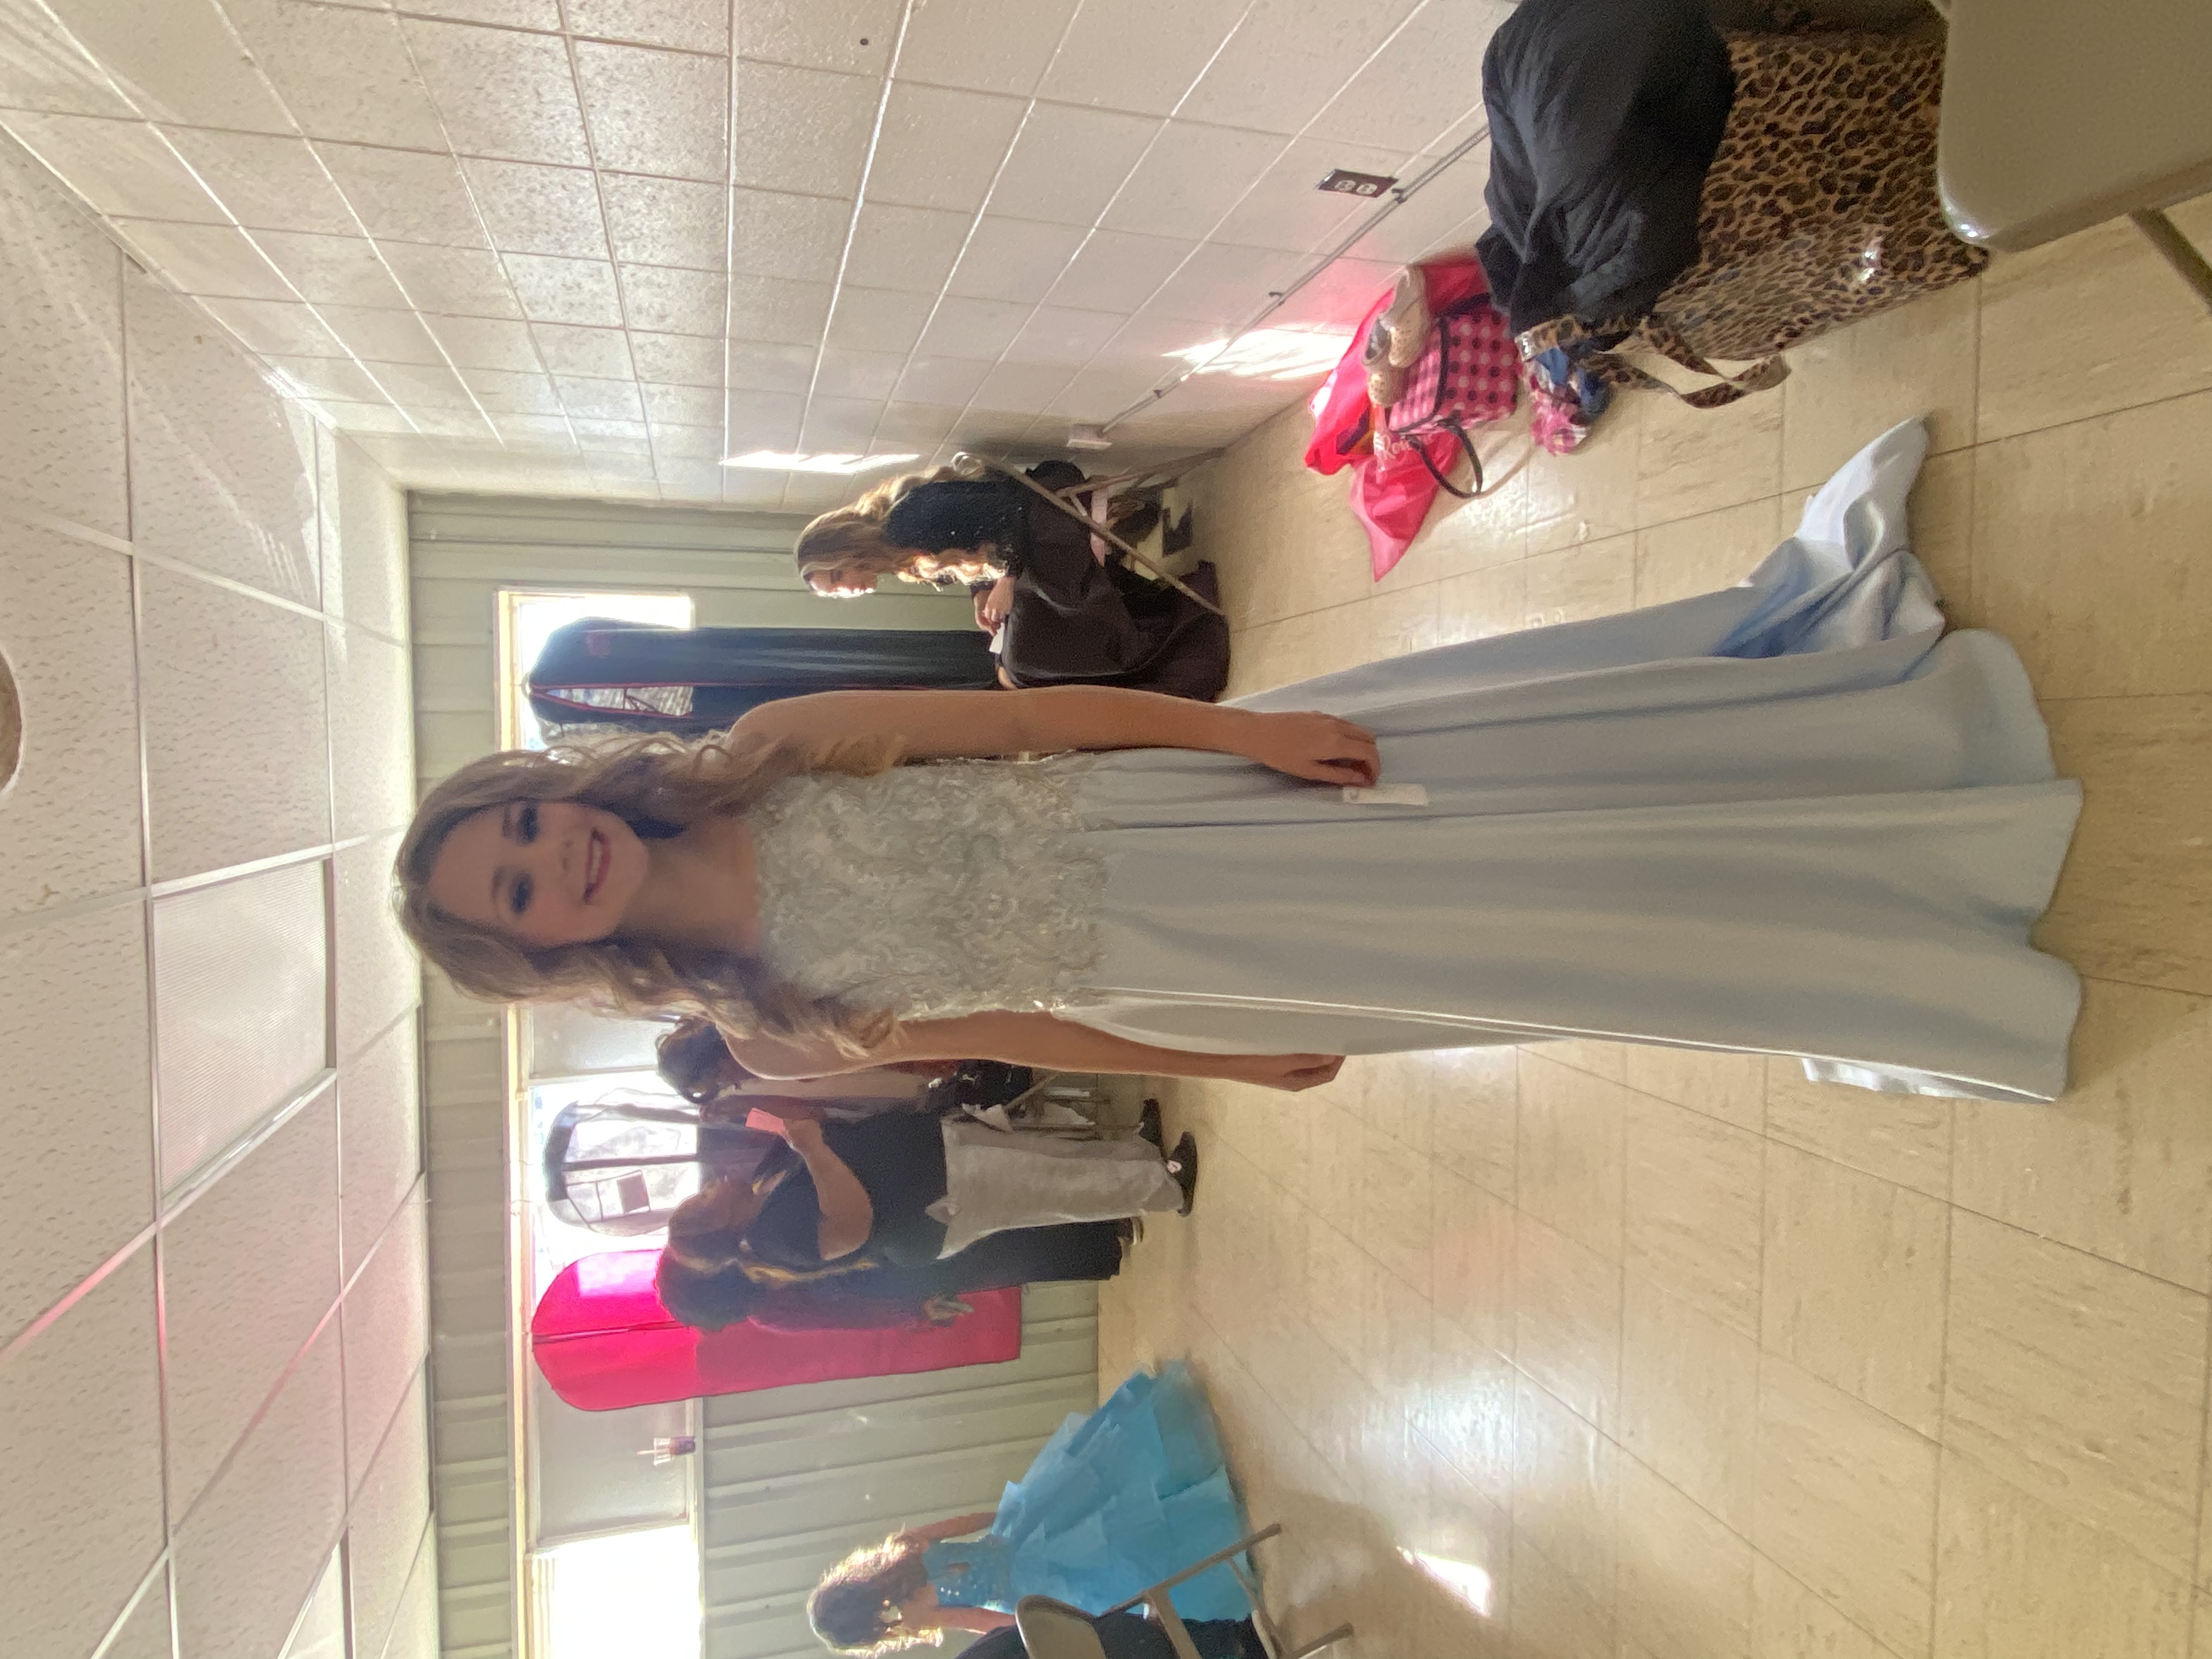 This look from ericbridal Style Gallery! See more looks from their customers at this site!